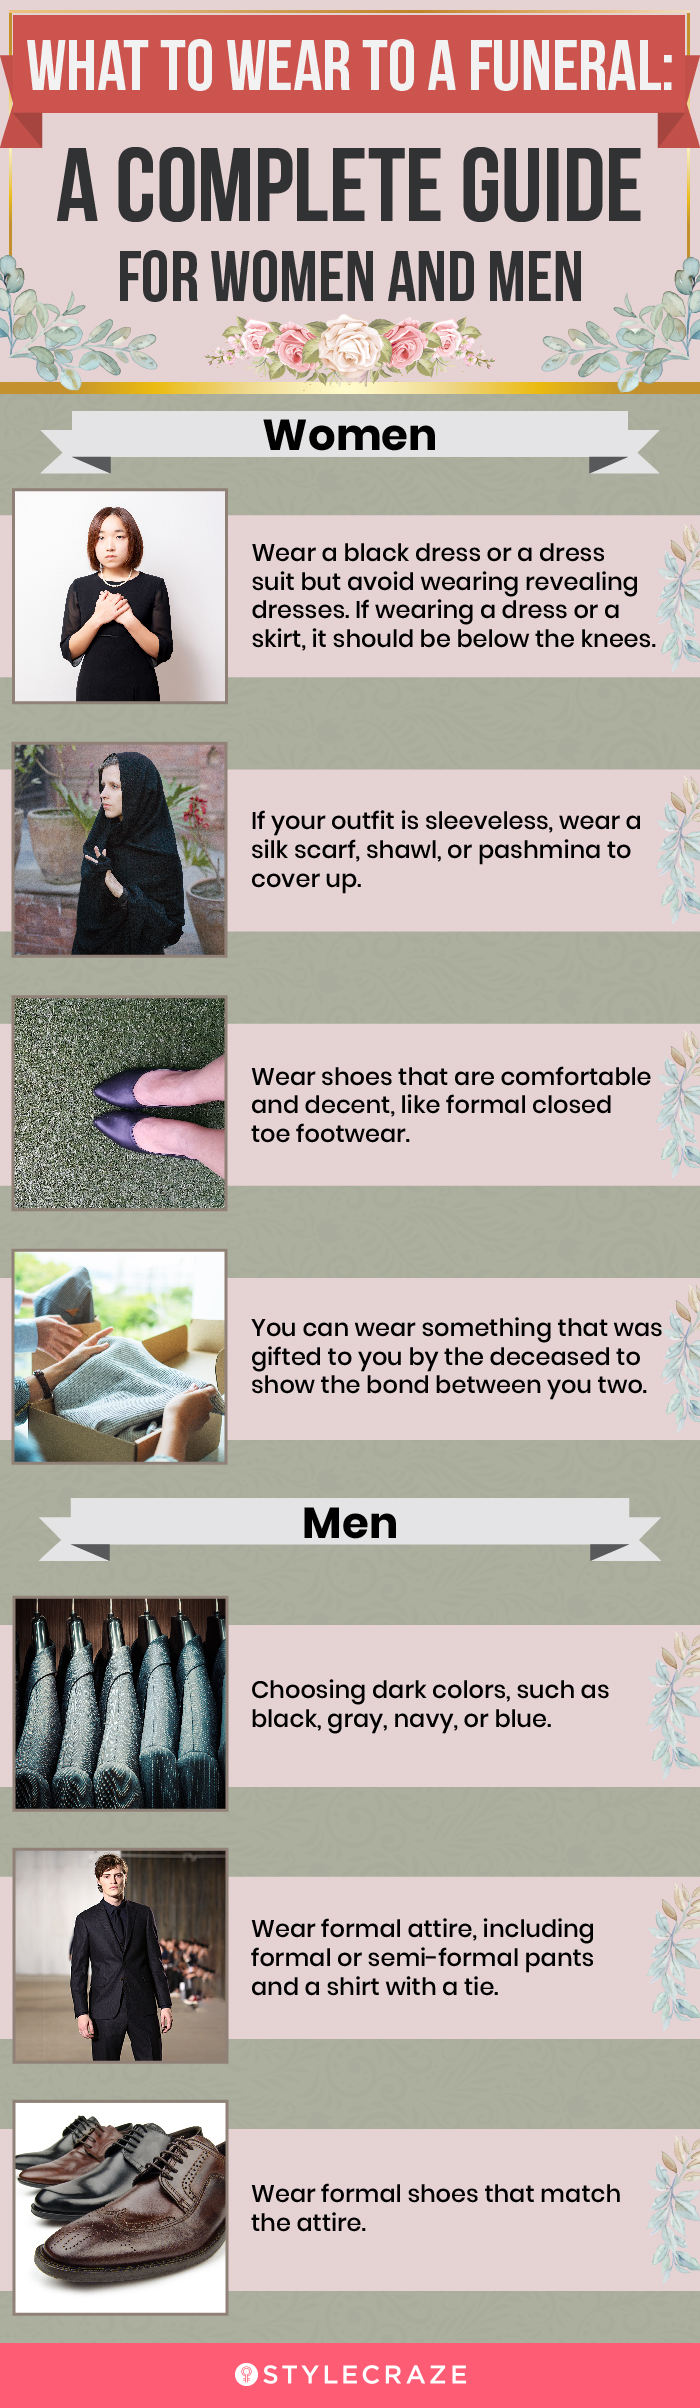 what to wear to a funeral a complete guide for women and men (infographic)